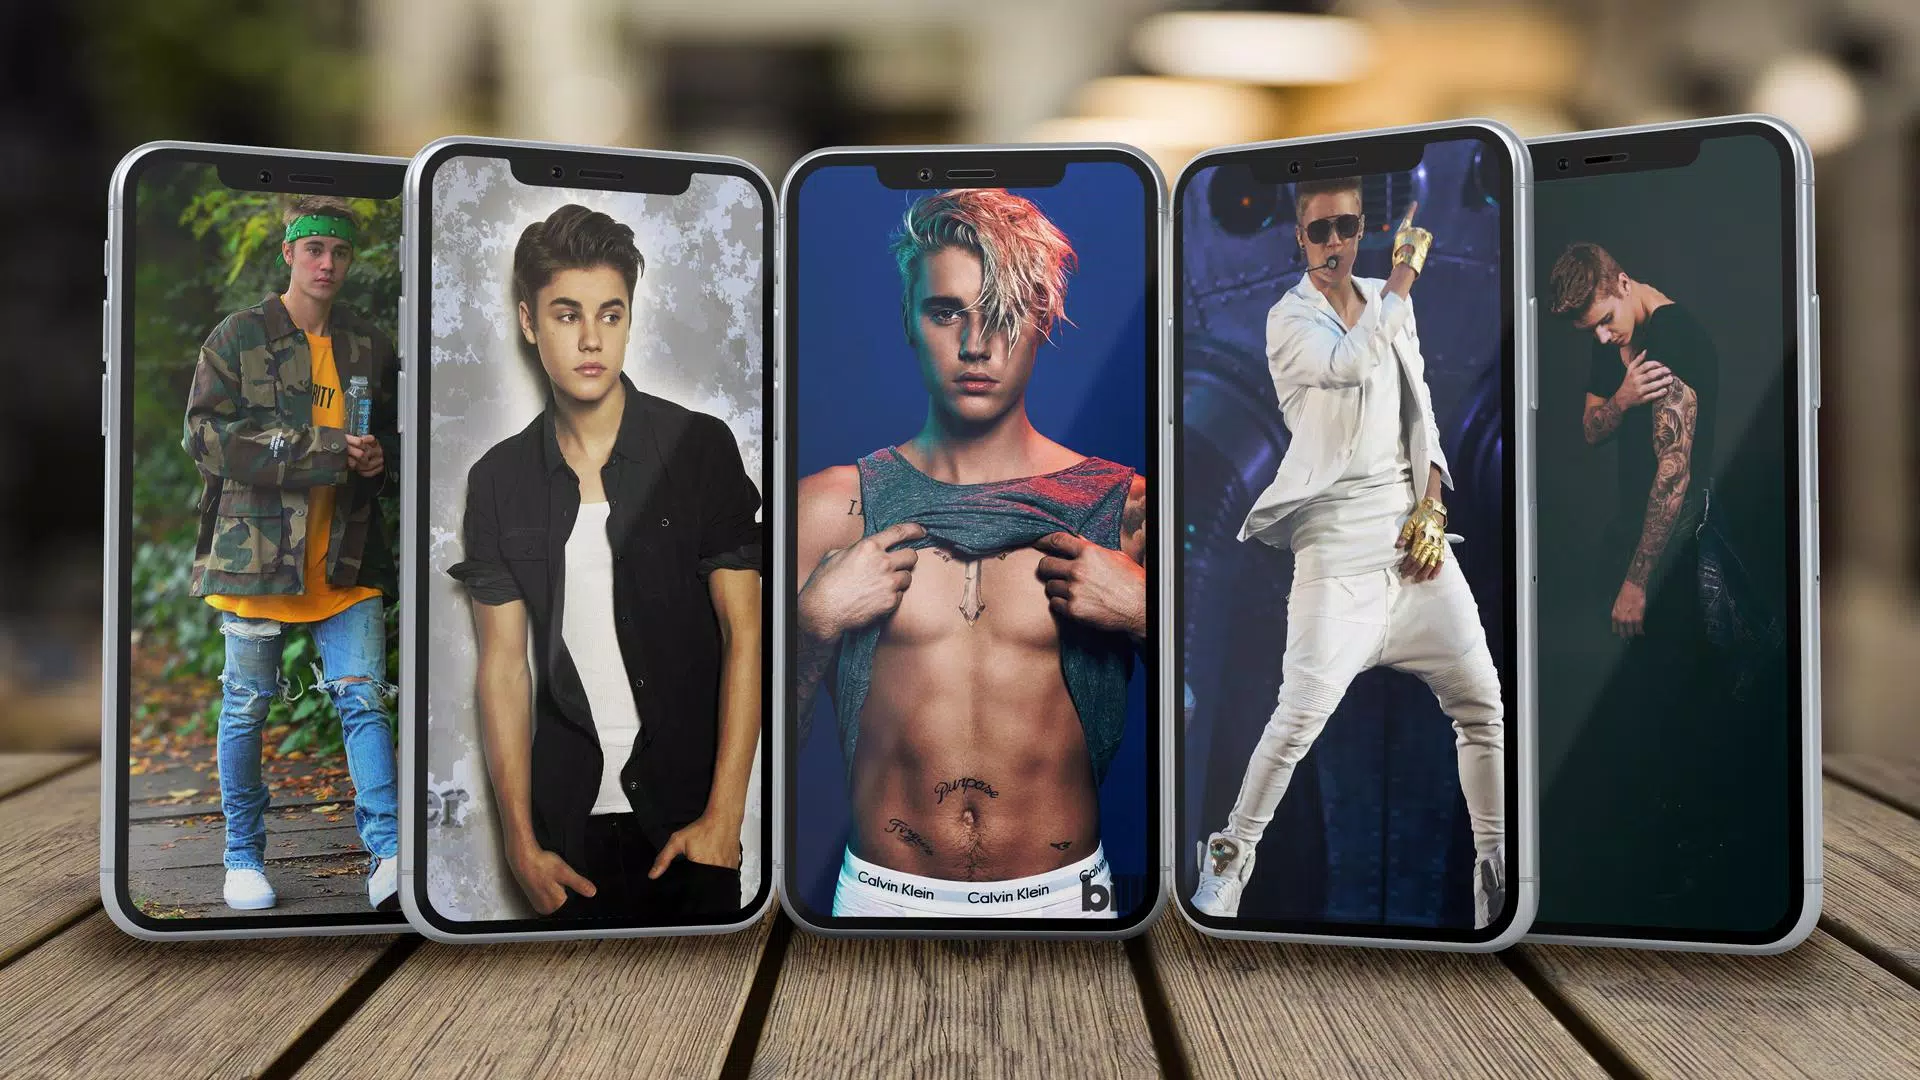 Justin Bieber Wallpaper For Android Apk Download